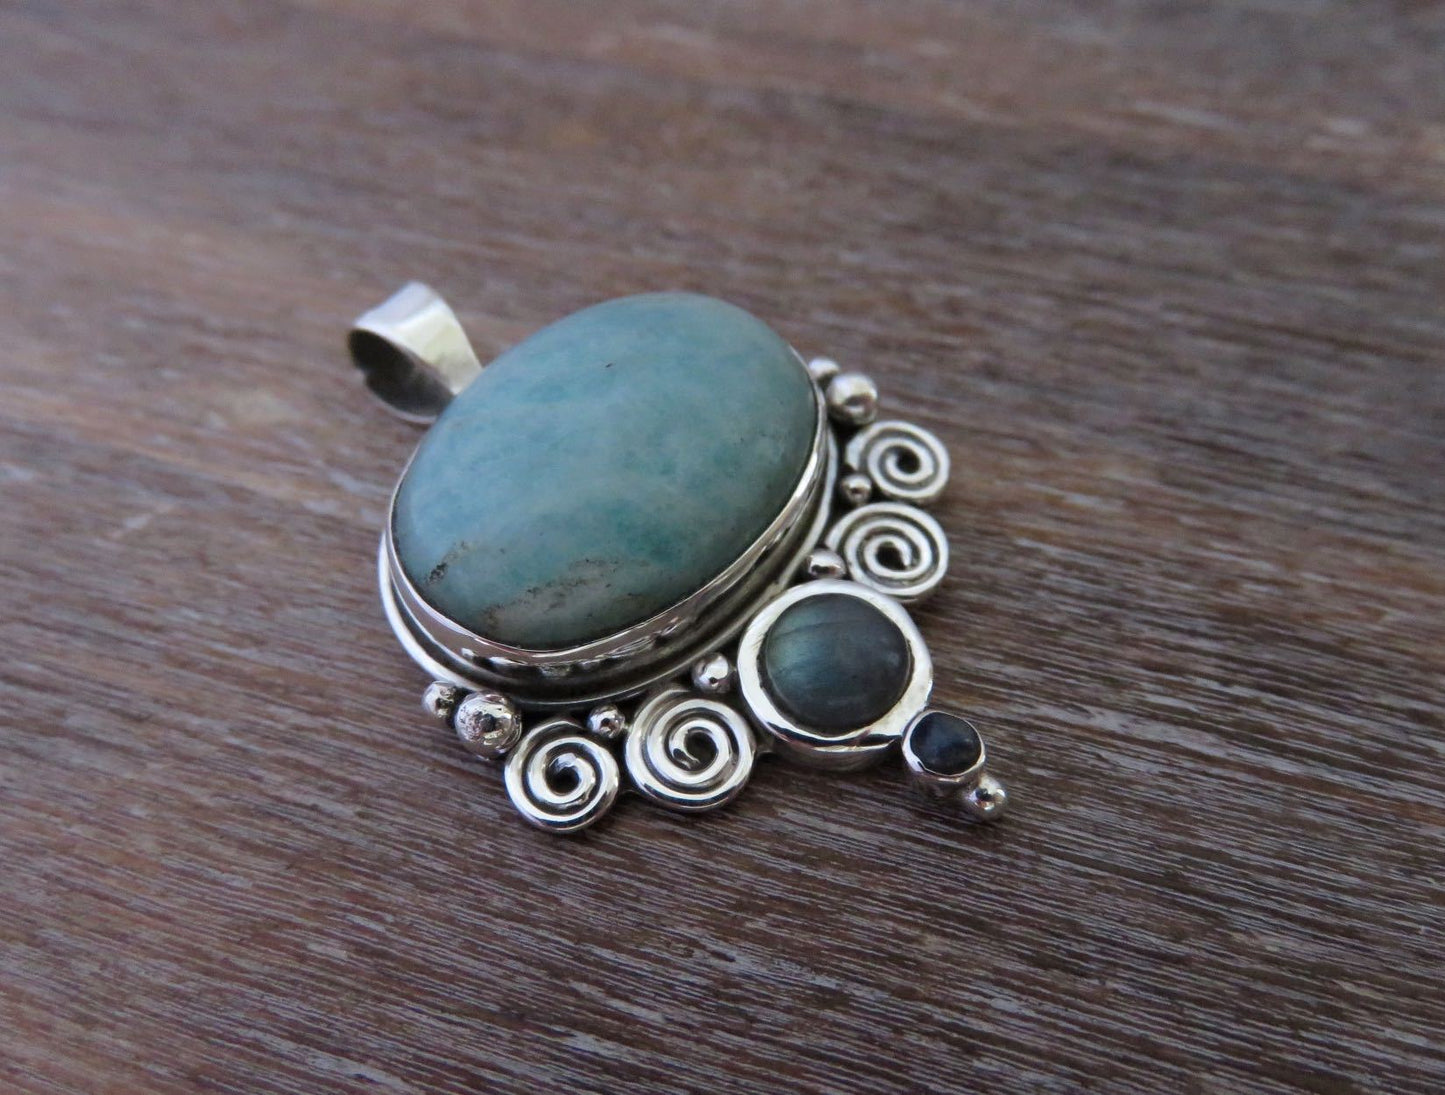 Pendant with spirals and stones made of silver